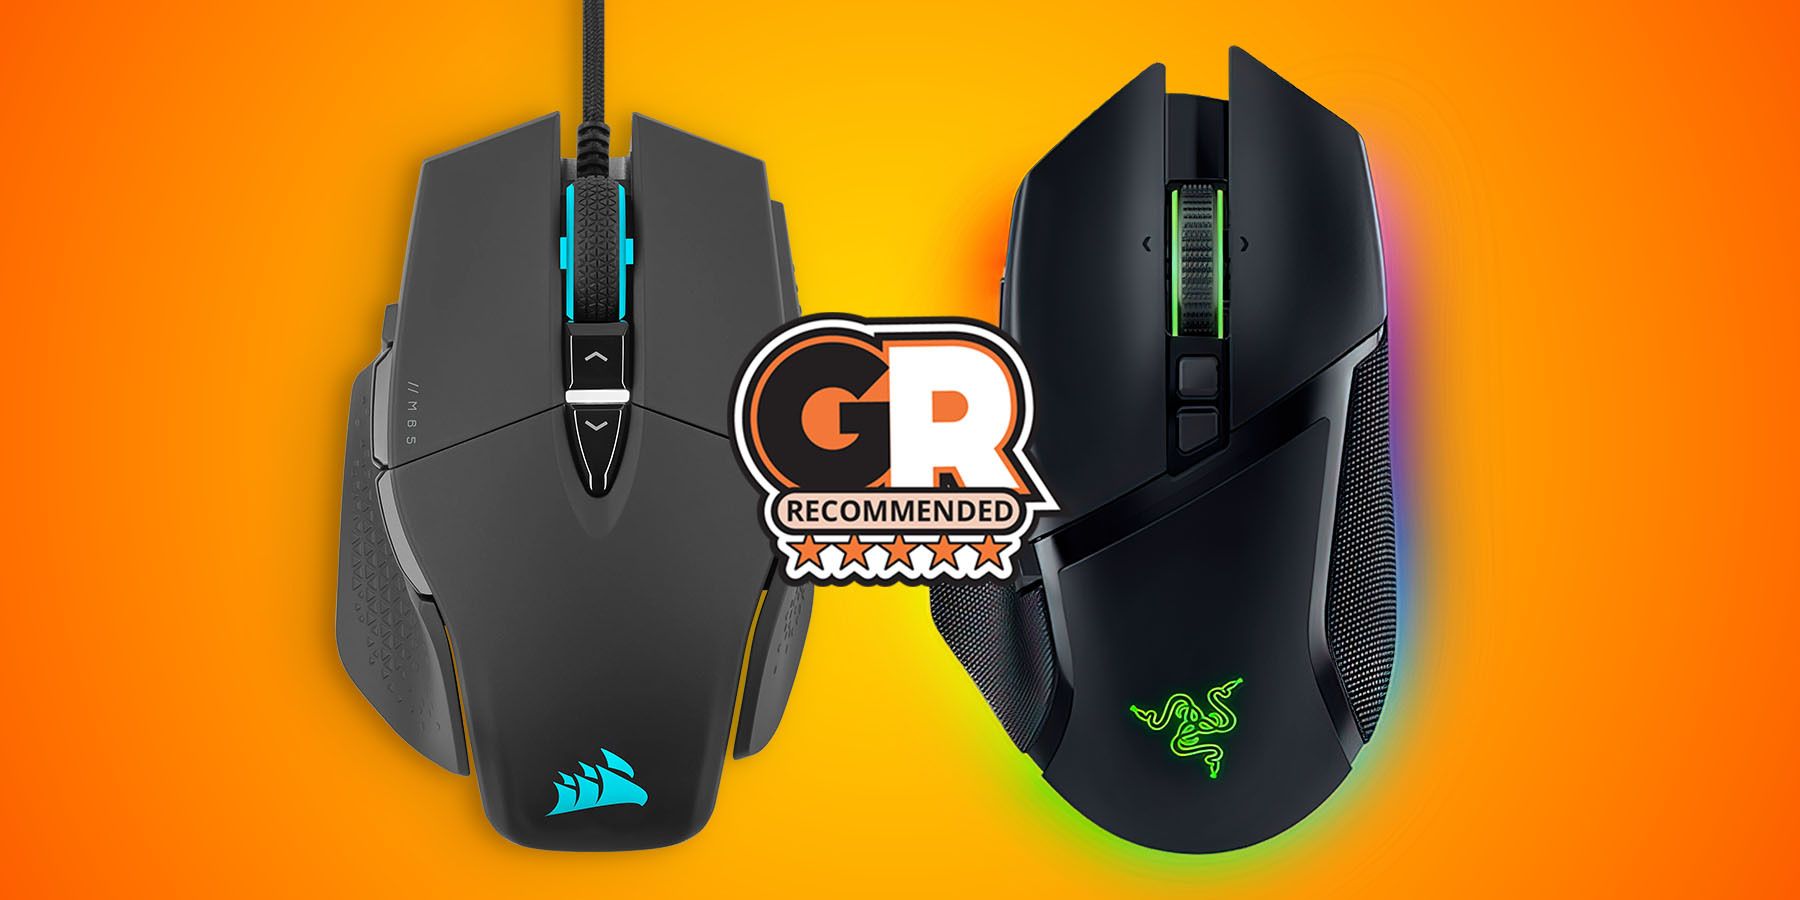 Wired vs. Wireless Mice: Which Is Best for Gaming? - Alibaba.com Reads